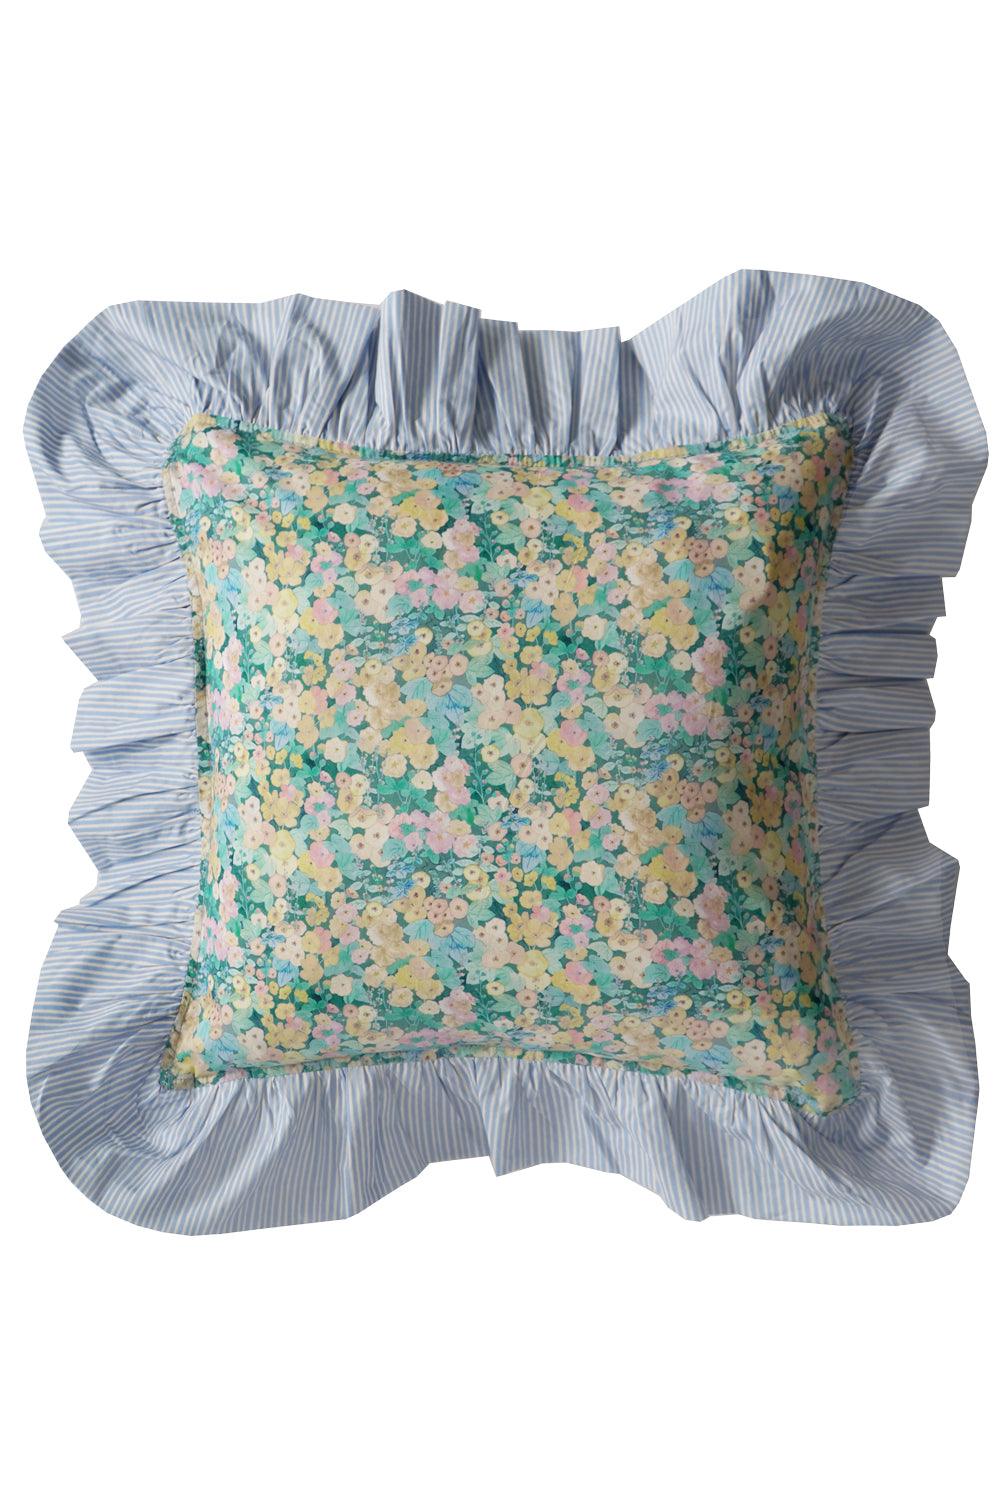 Ruffle Cushion made with Liberty Fabric HOLLYHOCKS & ELEMENTS BLUE - Coco & Wolf